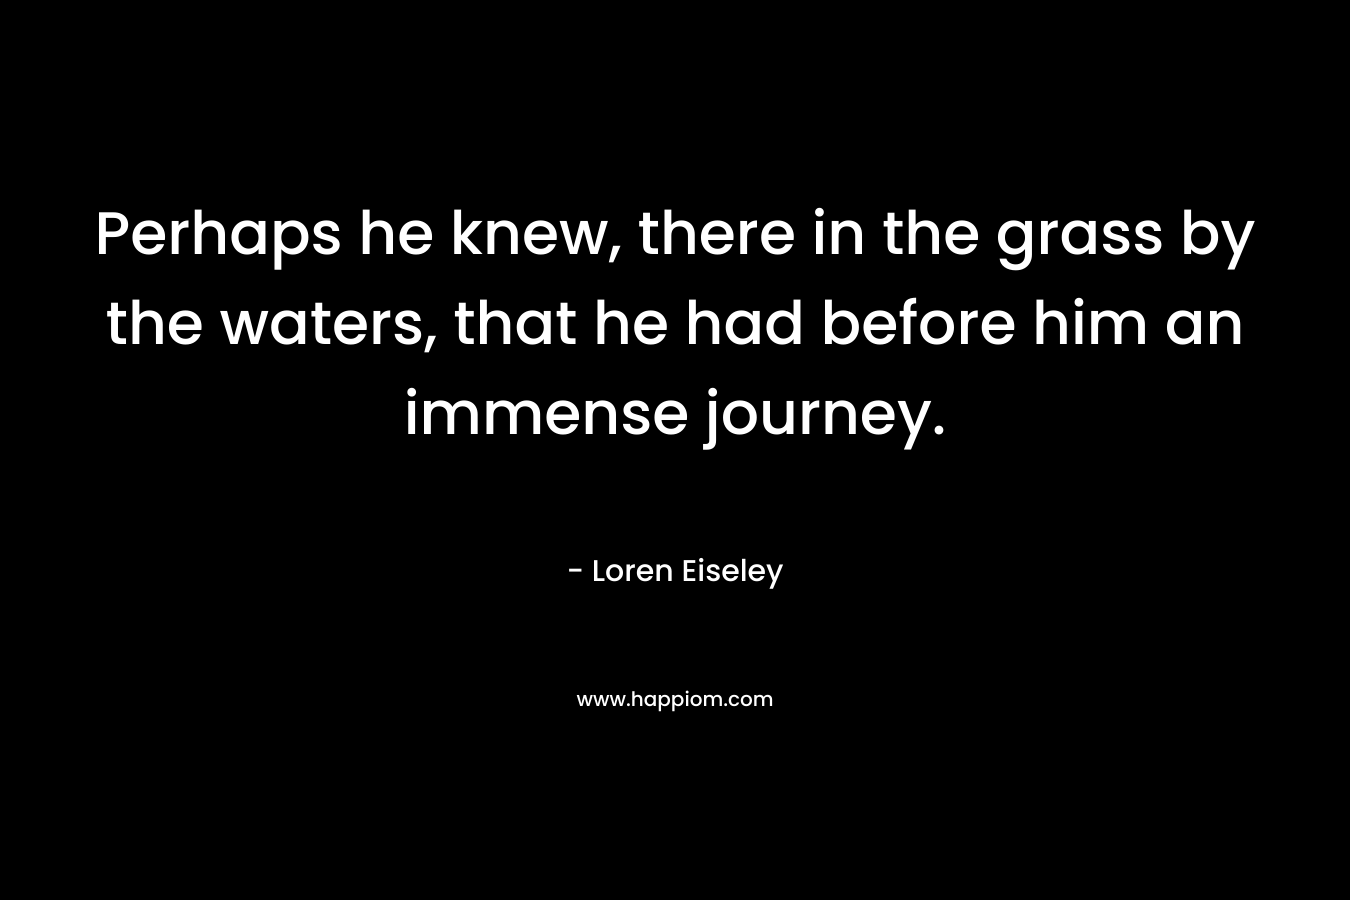 Perhaps he knew, there in the grass by the waters, that he had before him an immense journey.